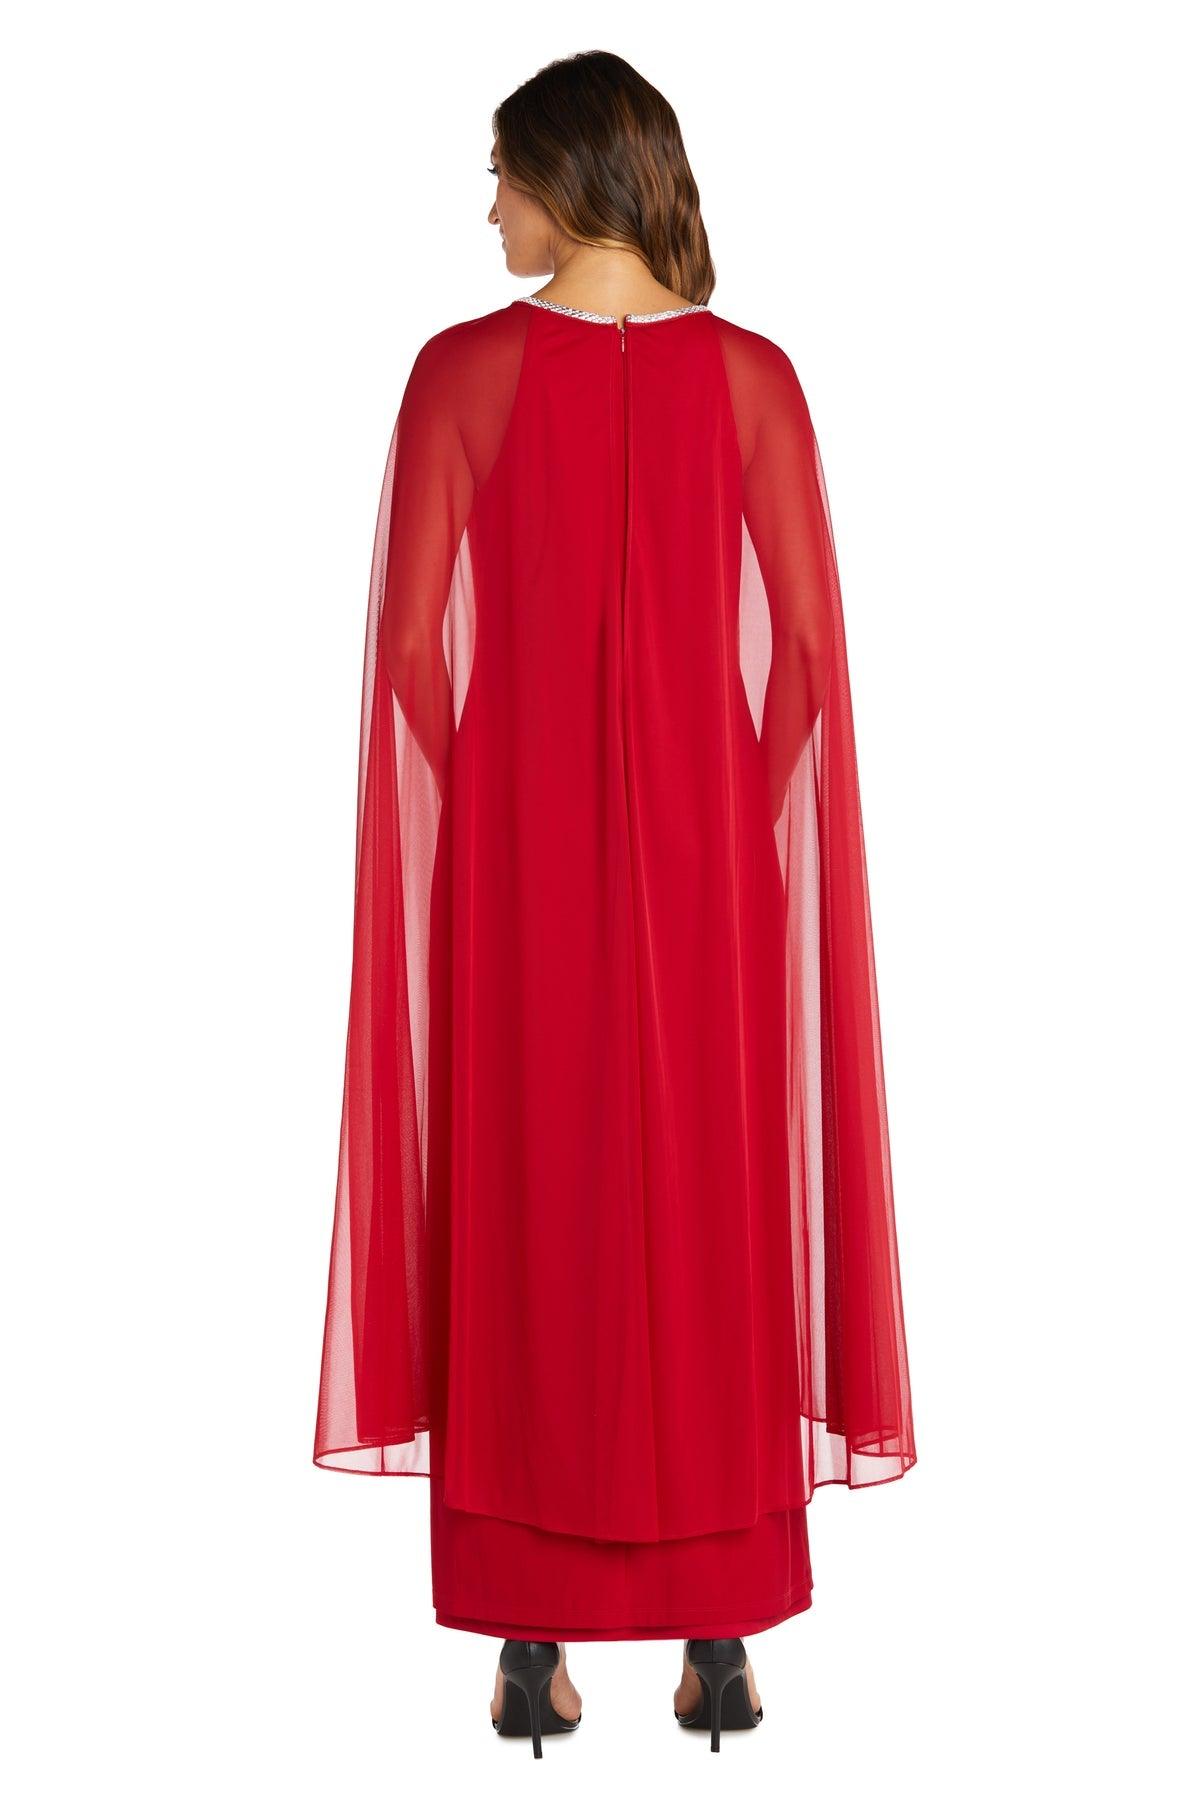 R&M Richards Plus Size Long Formal Cape Gown Red